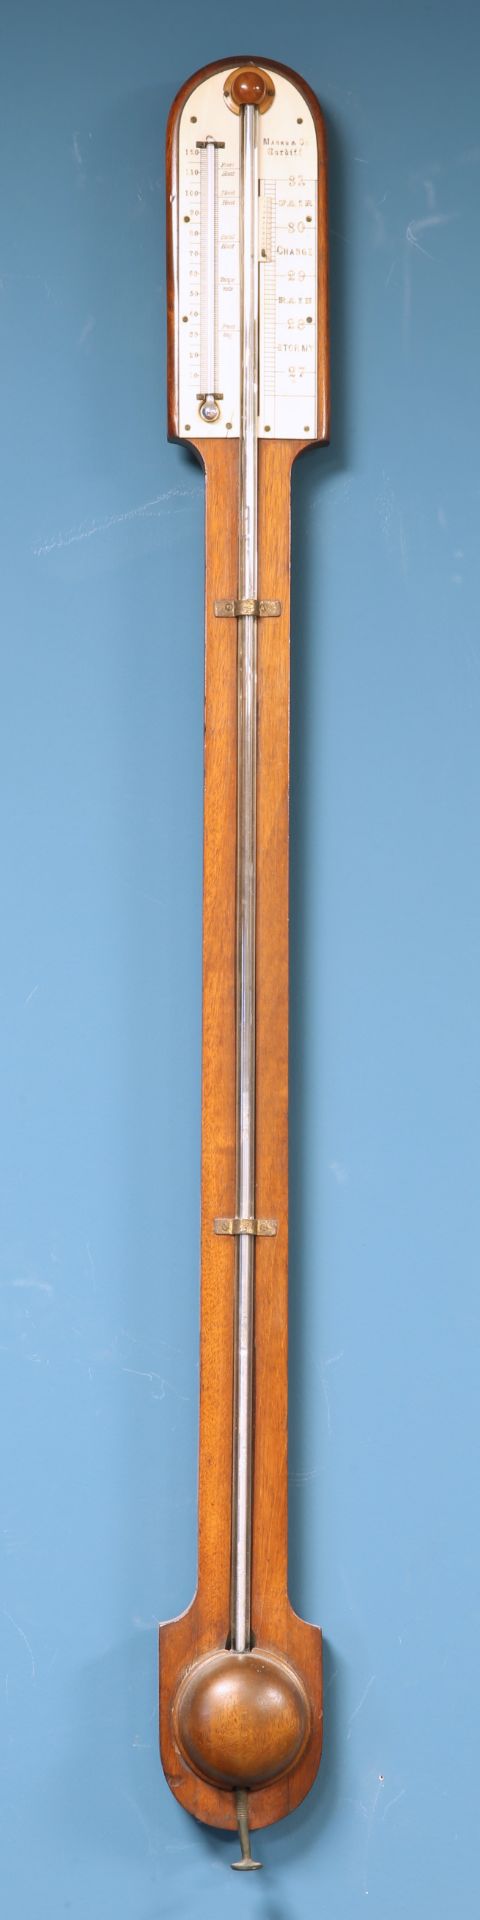 A LATE 19TH CENTURY MAHOGANY STICK BAROMETER, signed Marks & Co, Cardiff, ivory dial with